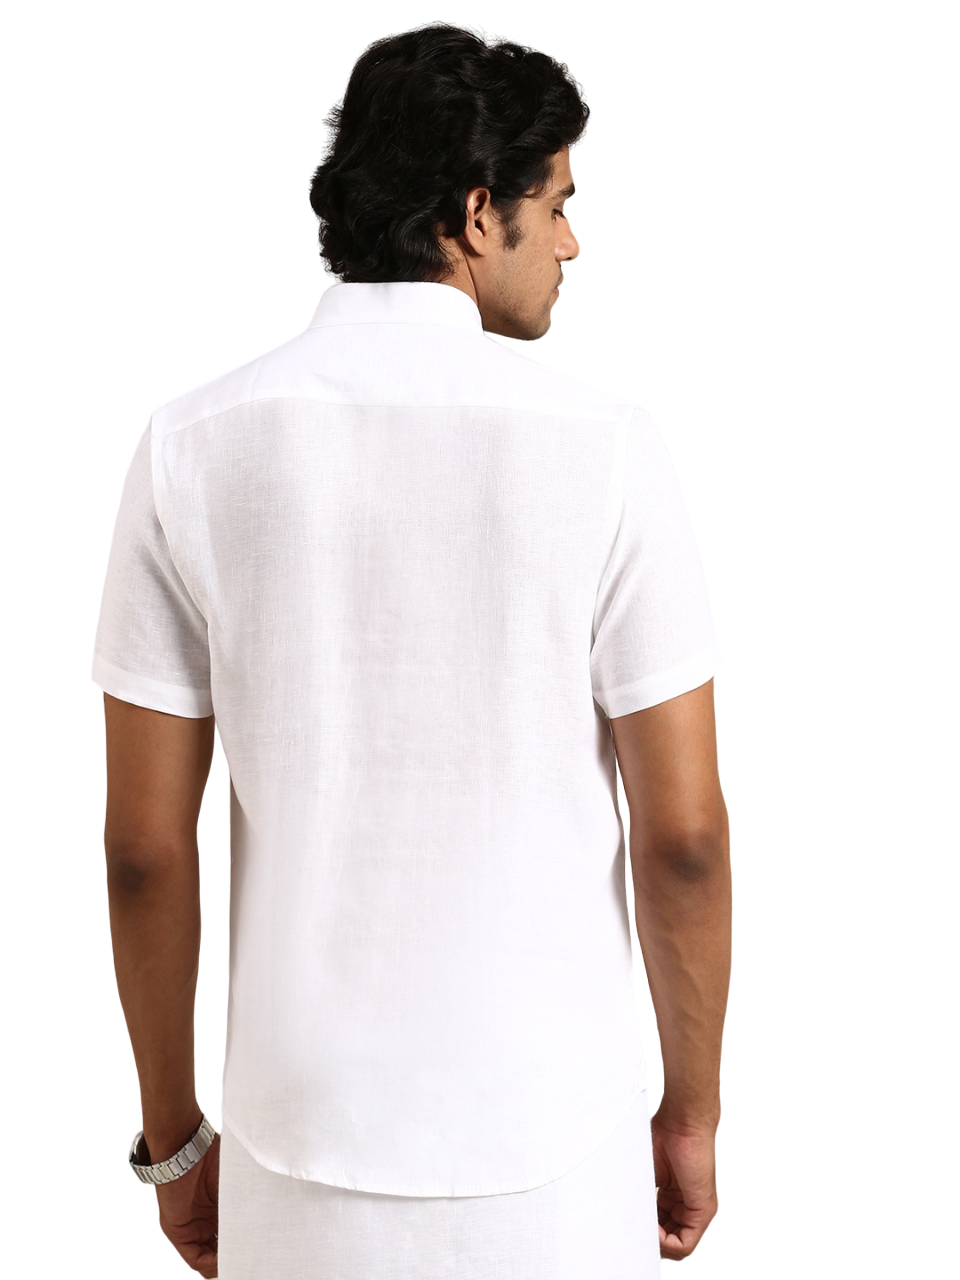 Mens 100% Linen Chinese Collar White Shirt Half Sleeves 5445-Back view